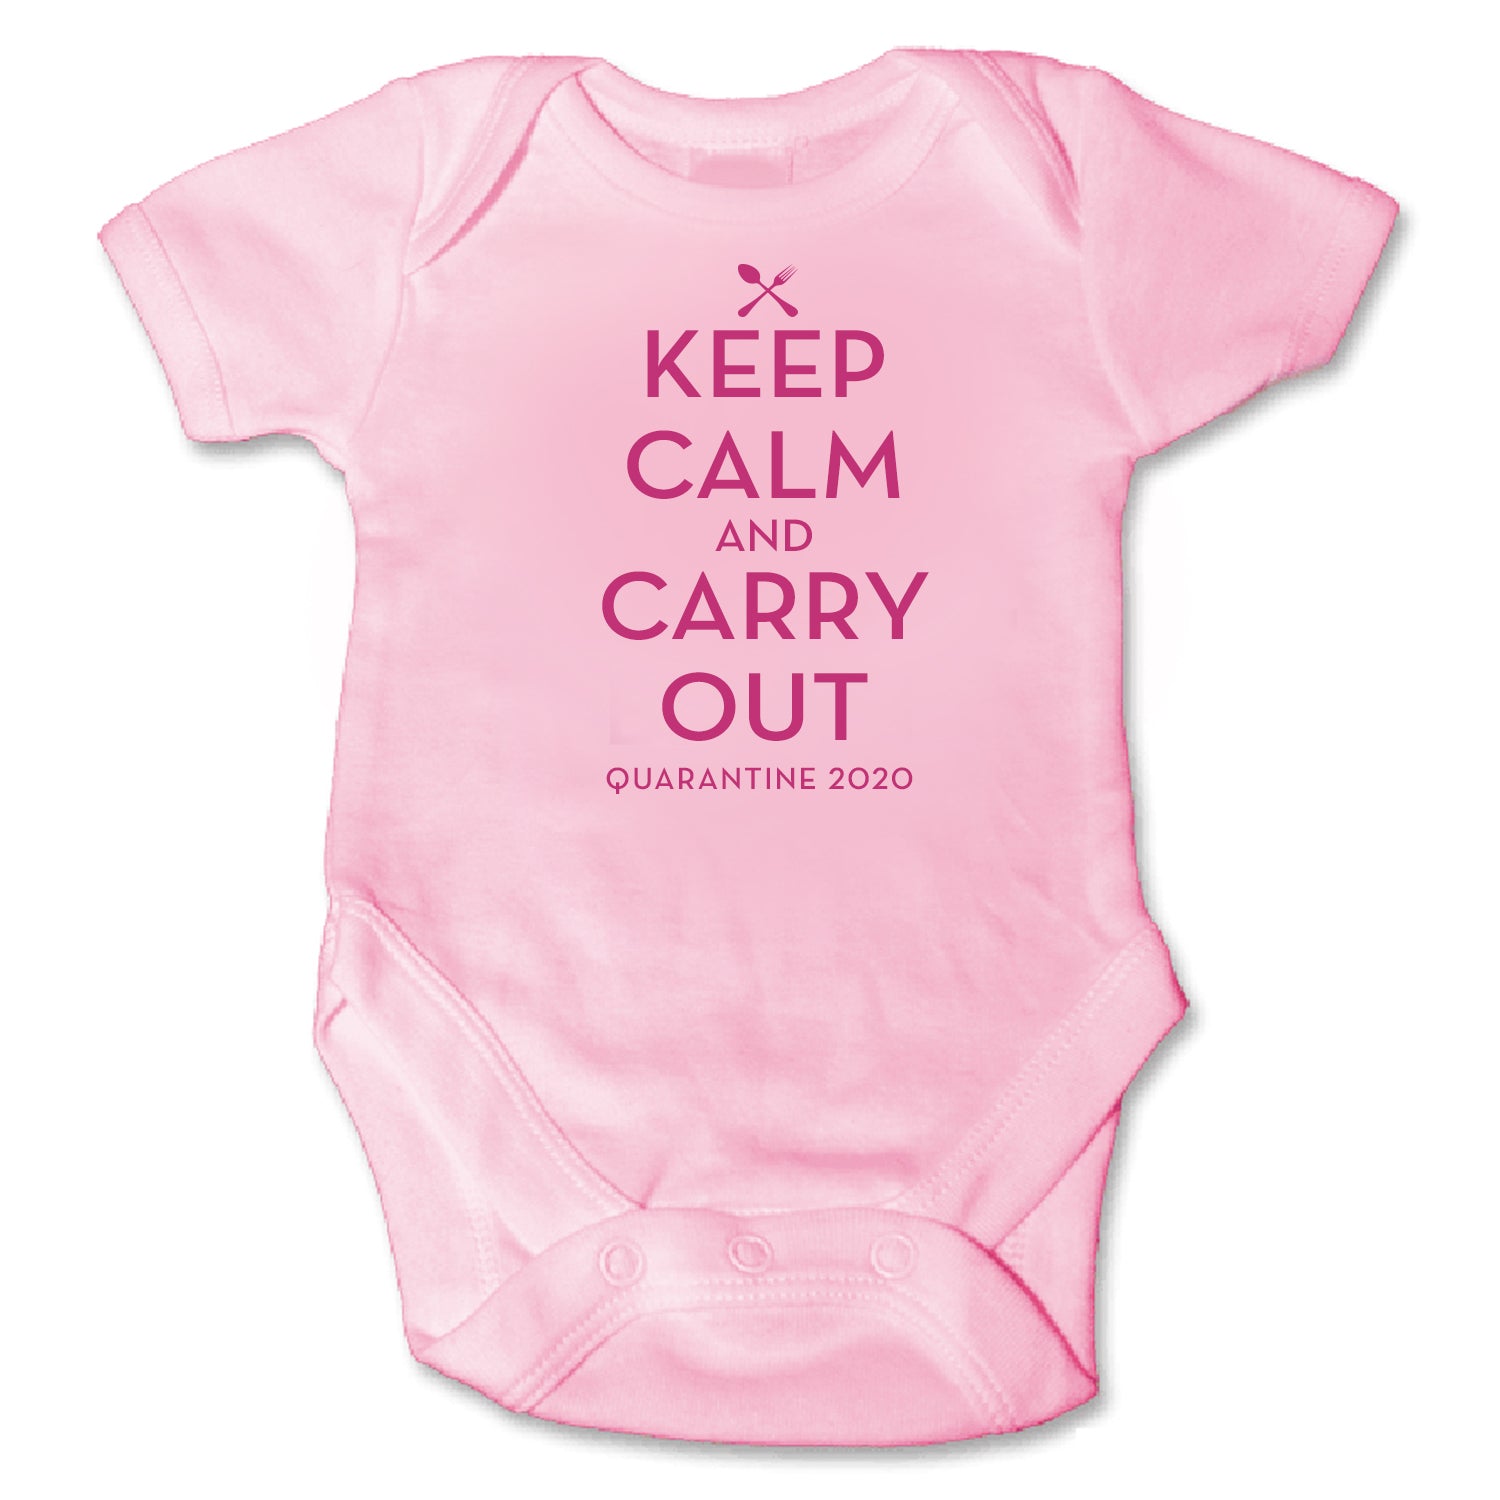 Sol Baby Keep Calm & Carry Out Bodysuit